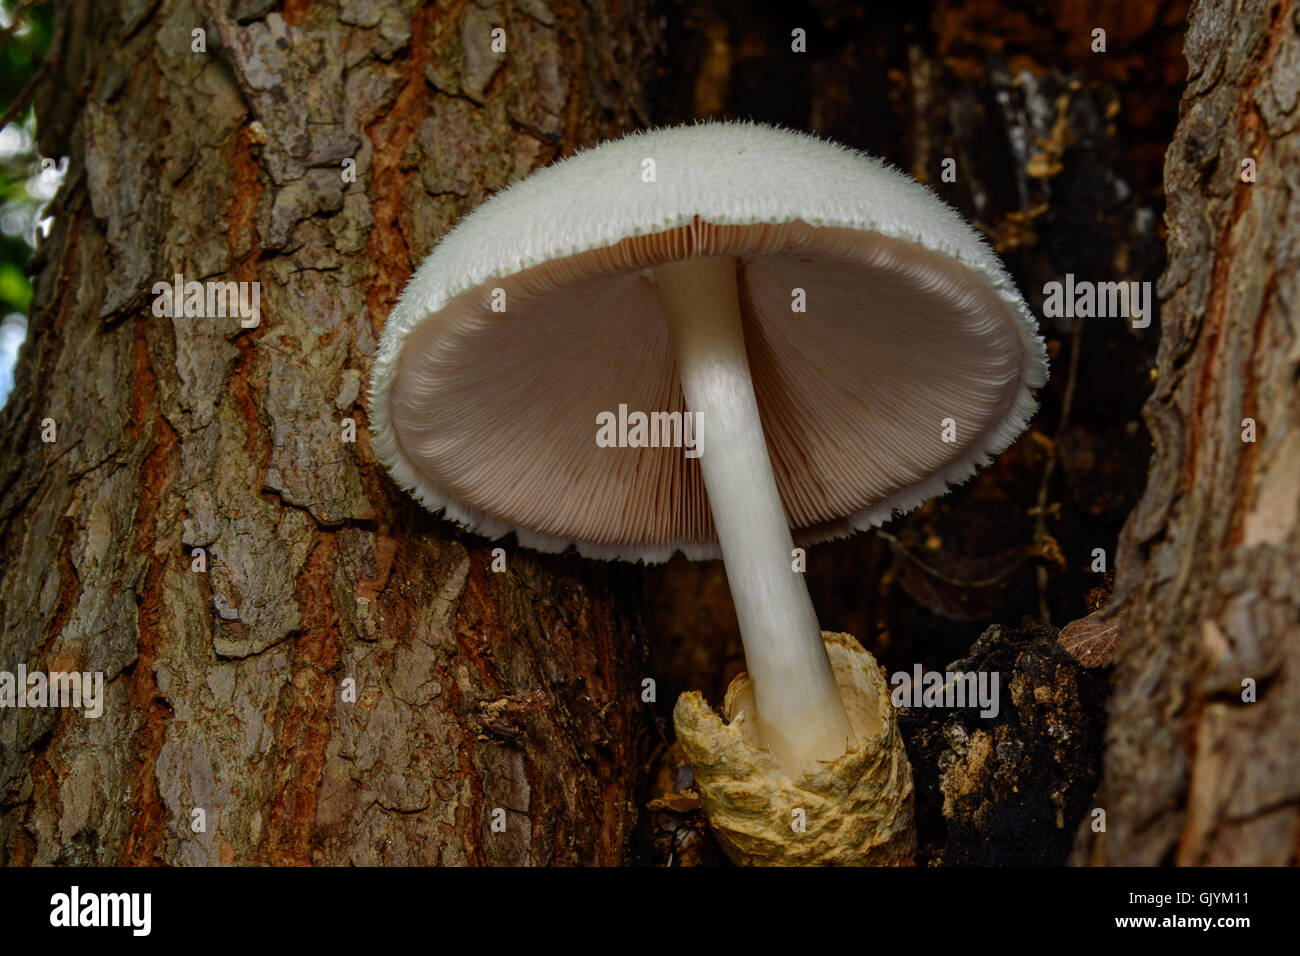 Silky Rosegill Mushroom Volvariella bombycina Snow White, textured cap with detailed underside revealing the gills or spines Stock Photo